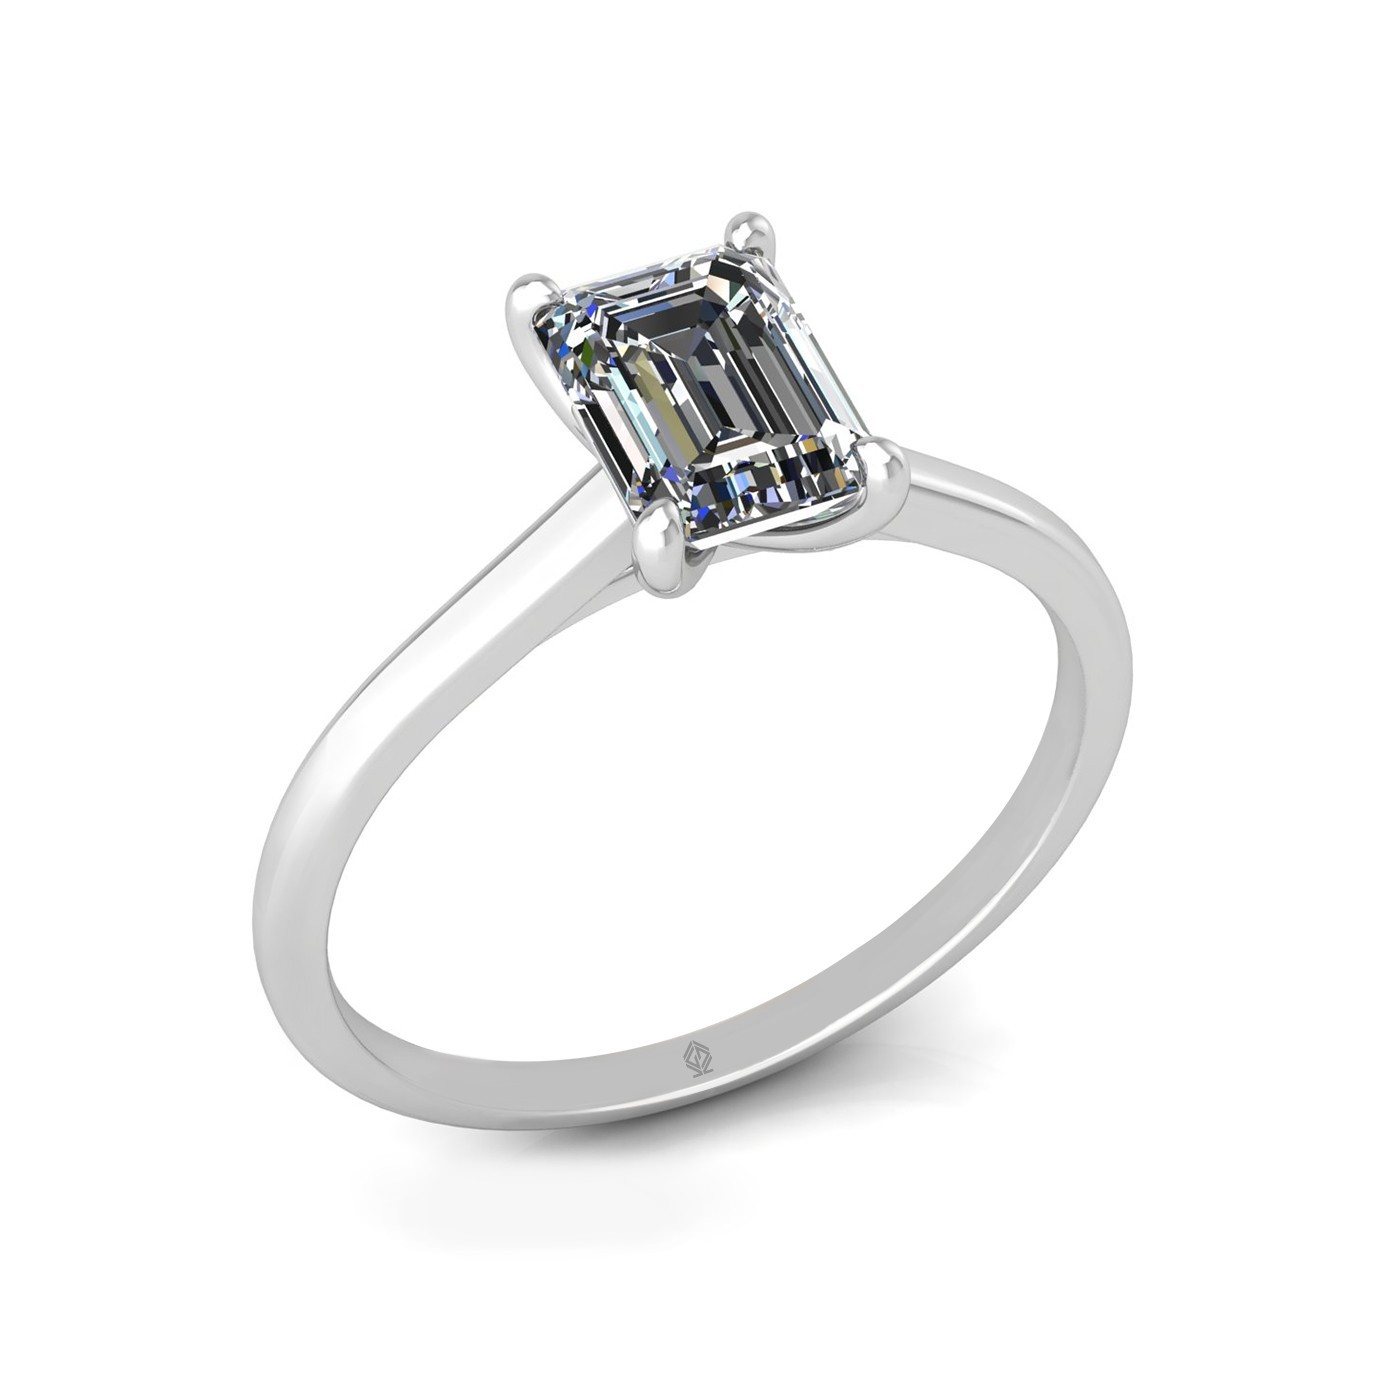 18K WHITE GOLD 4 PRONGS SOLITAIRE EMERALD CUT DIAMOND ENGAGEMENT RING WITH WHISPER THIN BAND